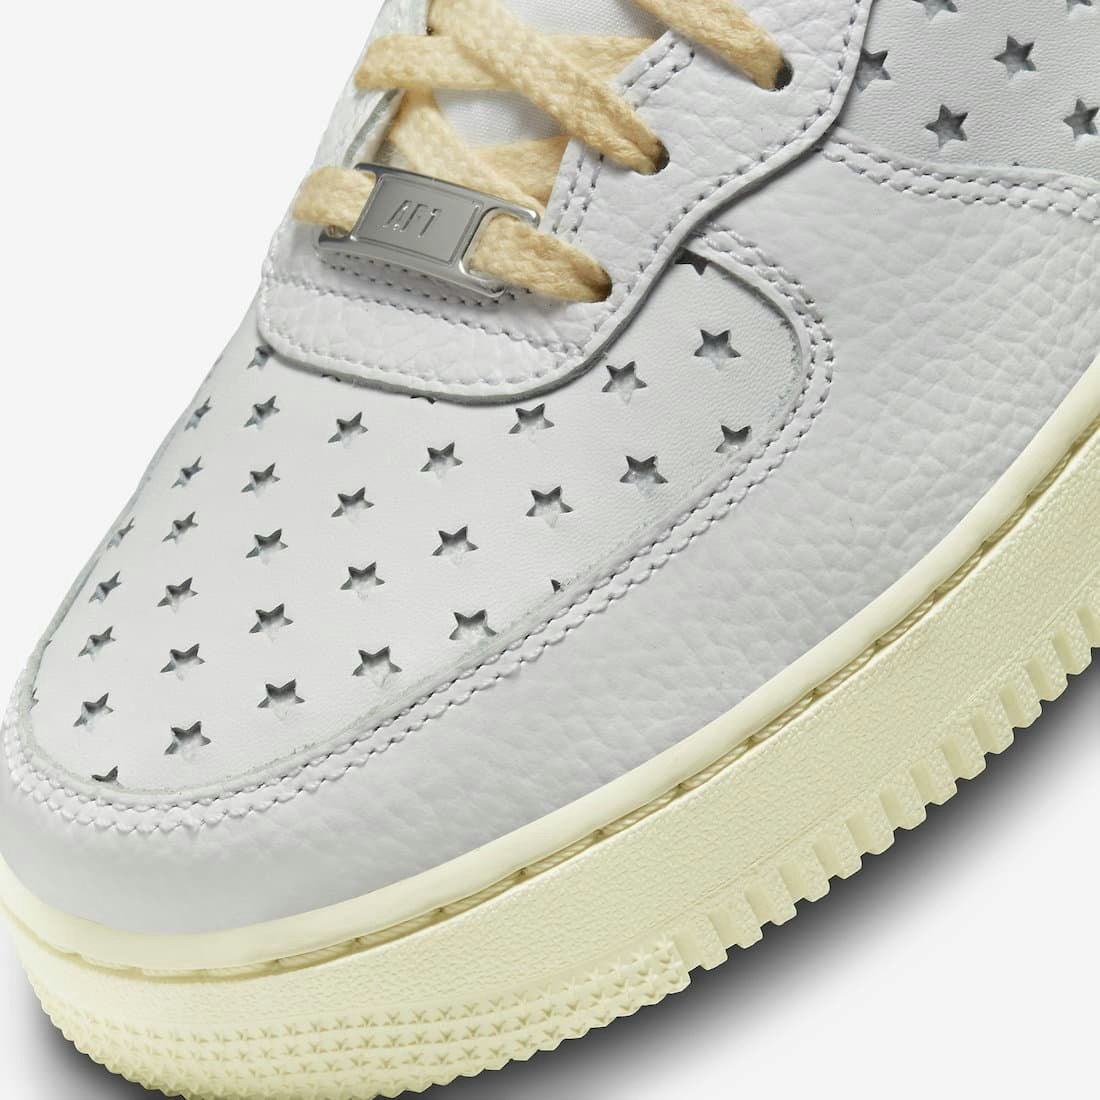 Nike Air Force 1 Mid "Star-Shaped"